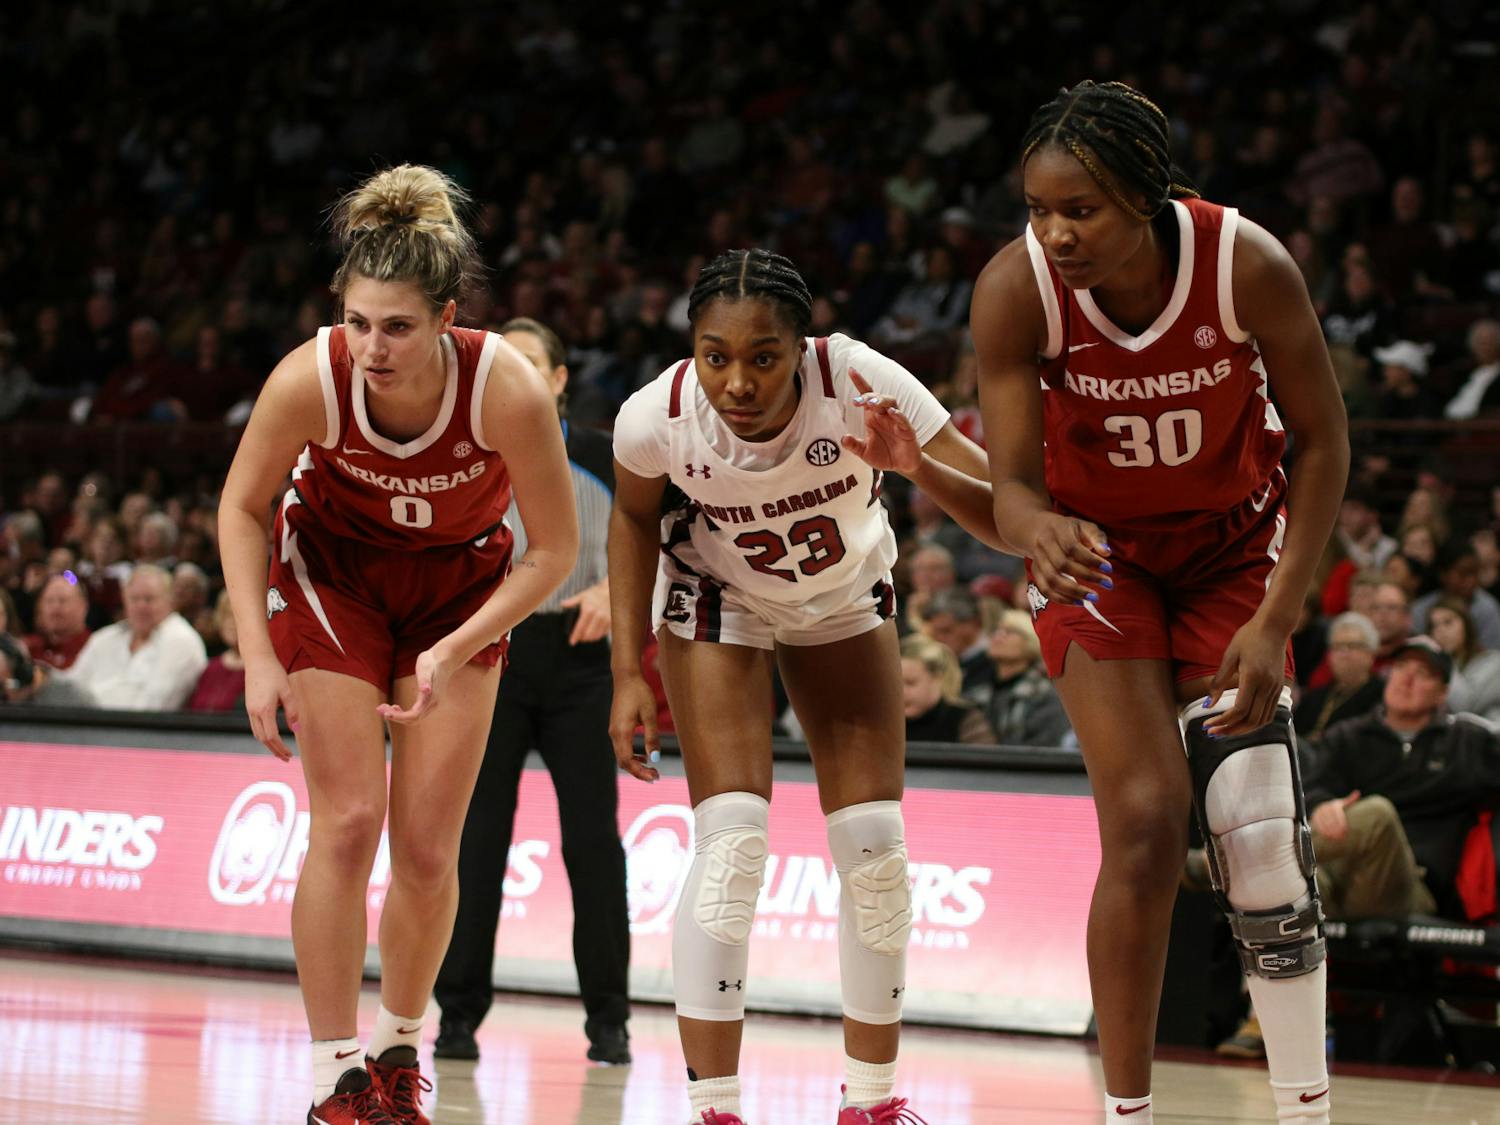 Sophomore guard Bree Hall prepares to box out her opponents on Jan. 22, 2023. The Gamecocks defeated Arkansas 92-46.&nbsp;